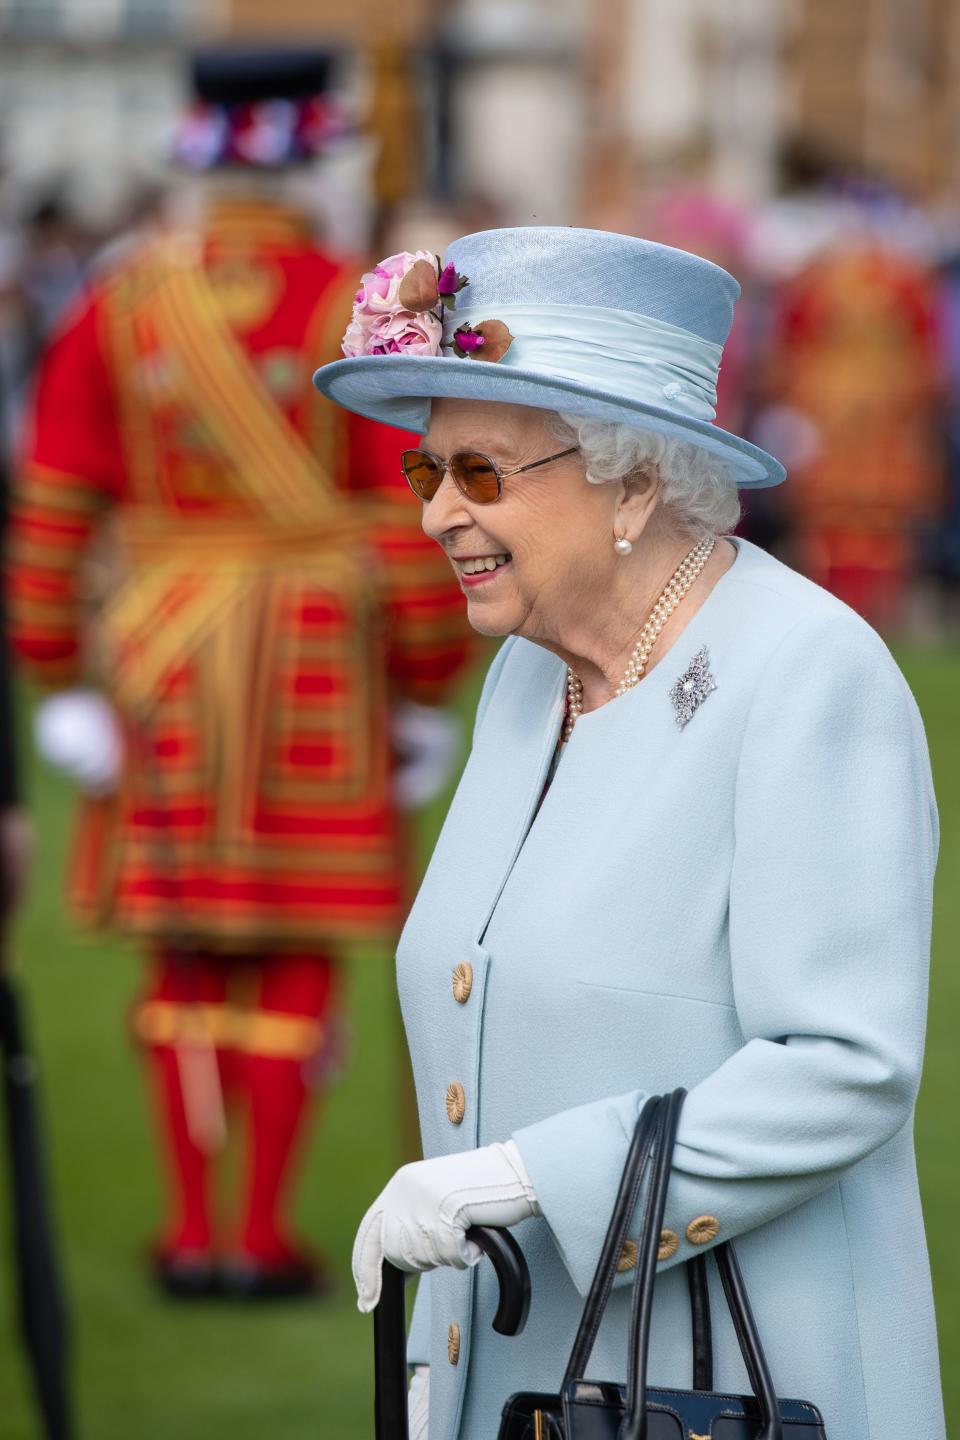 See Queen Elizabeth, Kate Middleton, and Prince William at the Queen's Annual Garden Party